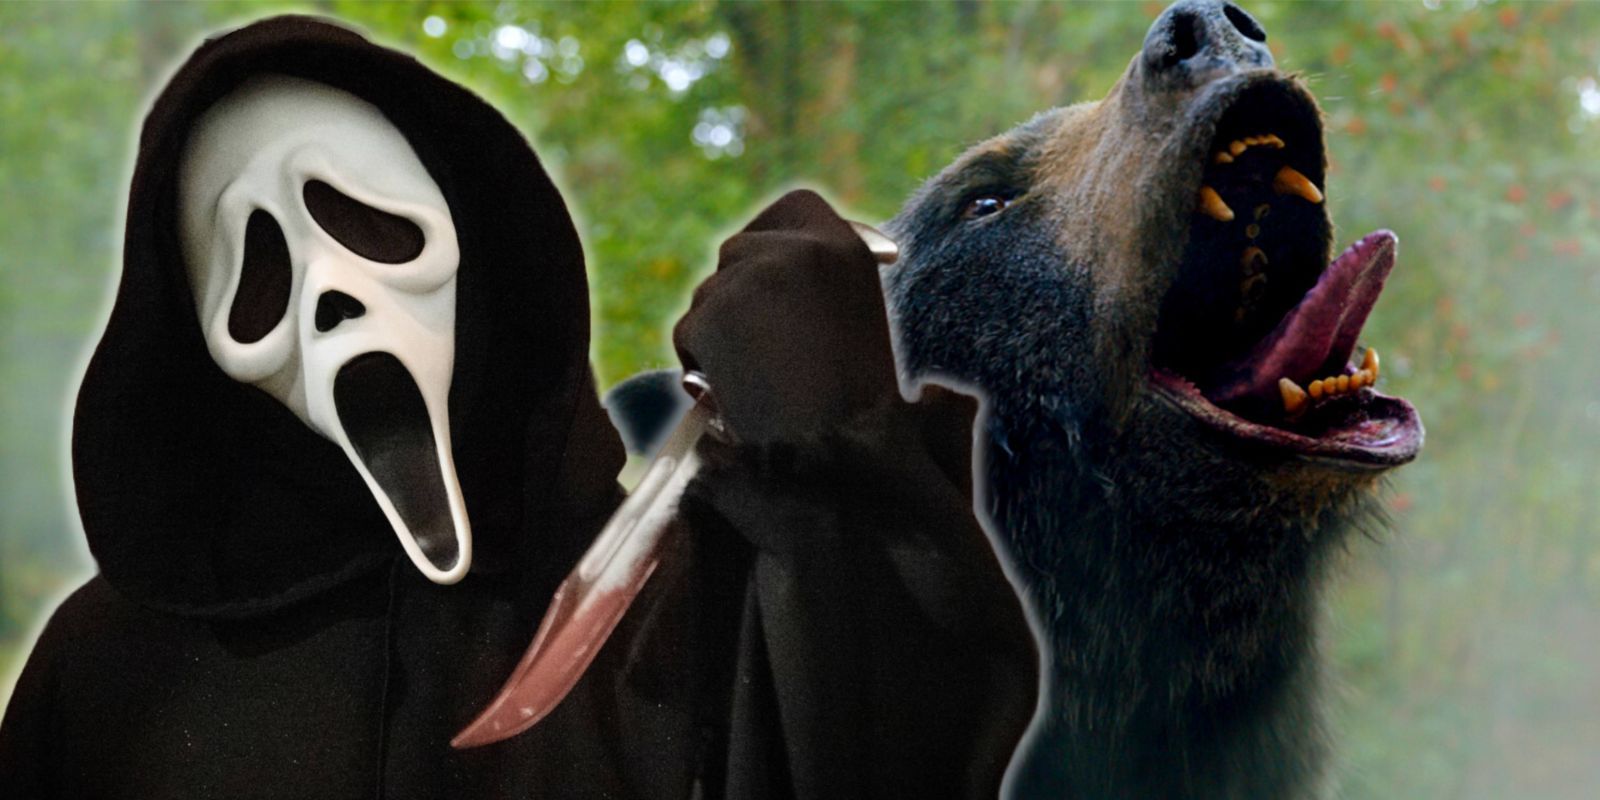 MOVIES!! FRIDAY 3.10 AND SATURDAY 3.11 SCREEN 2: SCREAM VI (R) 6:30 COCAINE  BEAR (R) 8:45 SCREEN 3: 65 (PG-13) 6:30 MISSING (PG-13)…